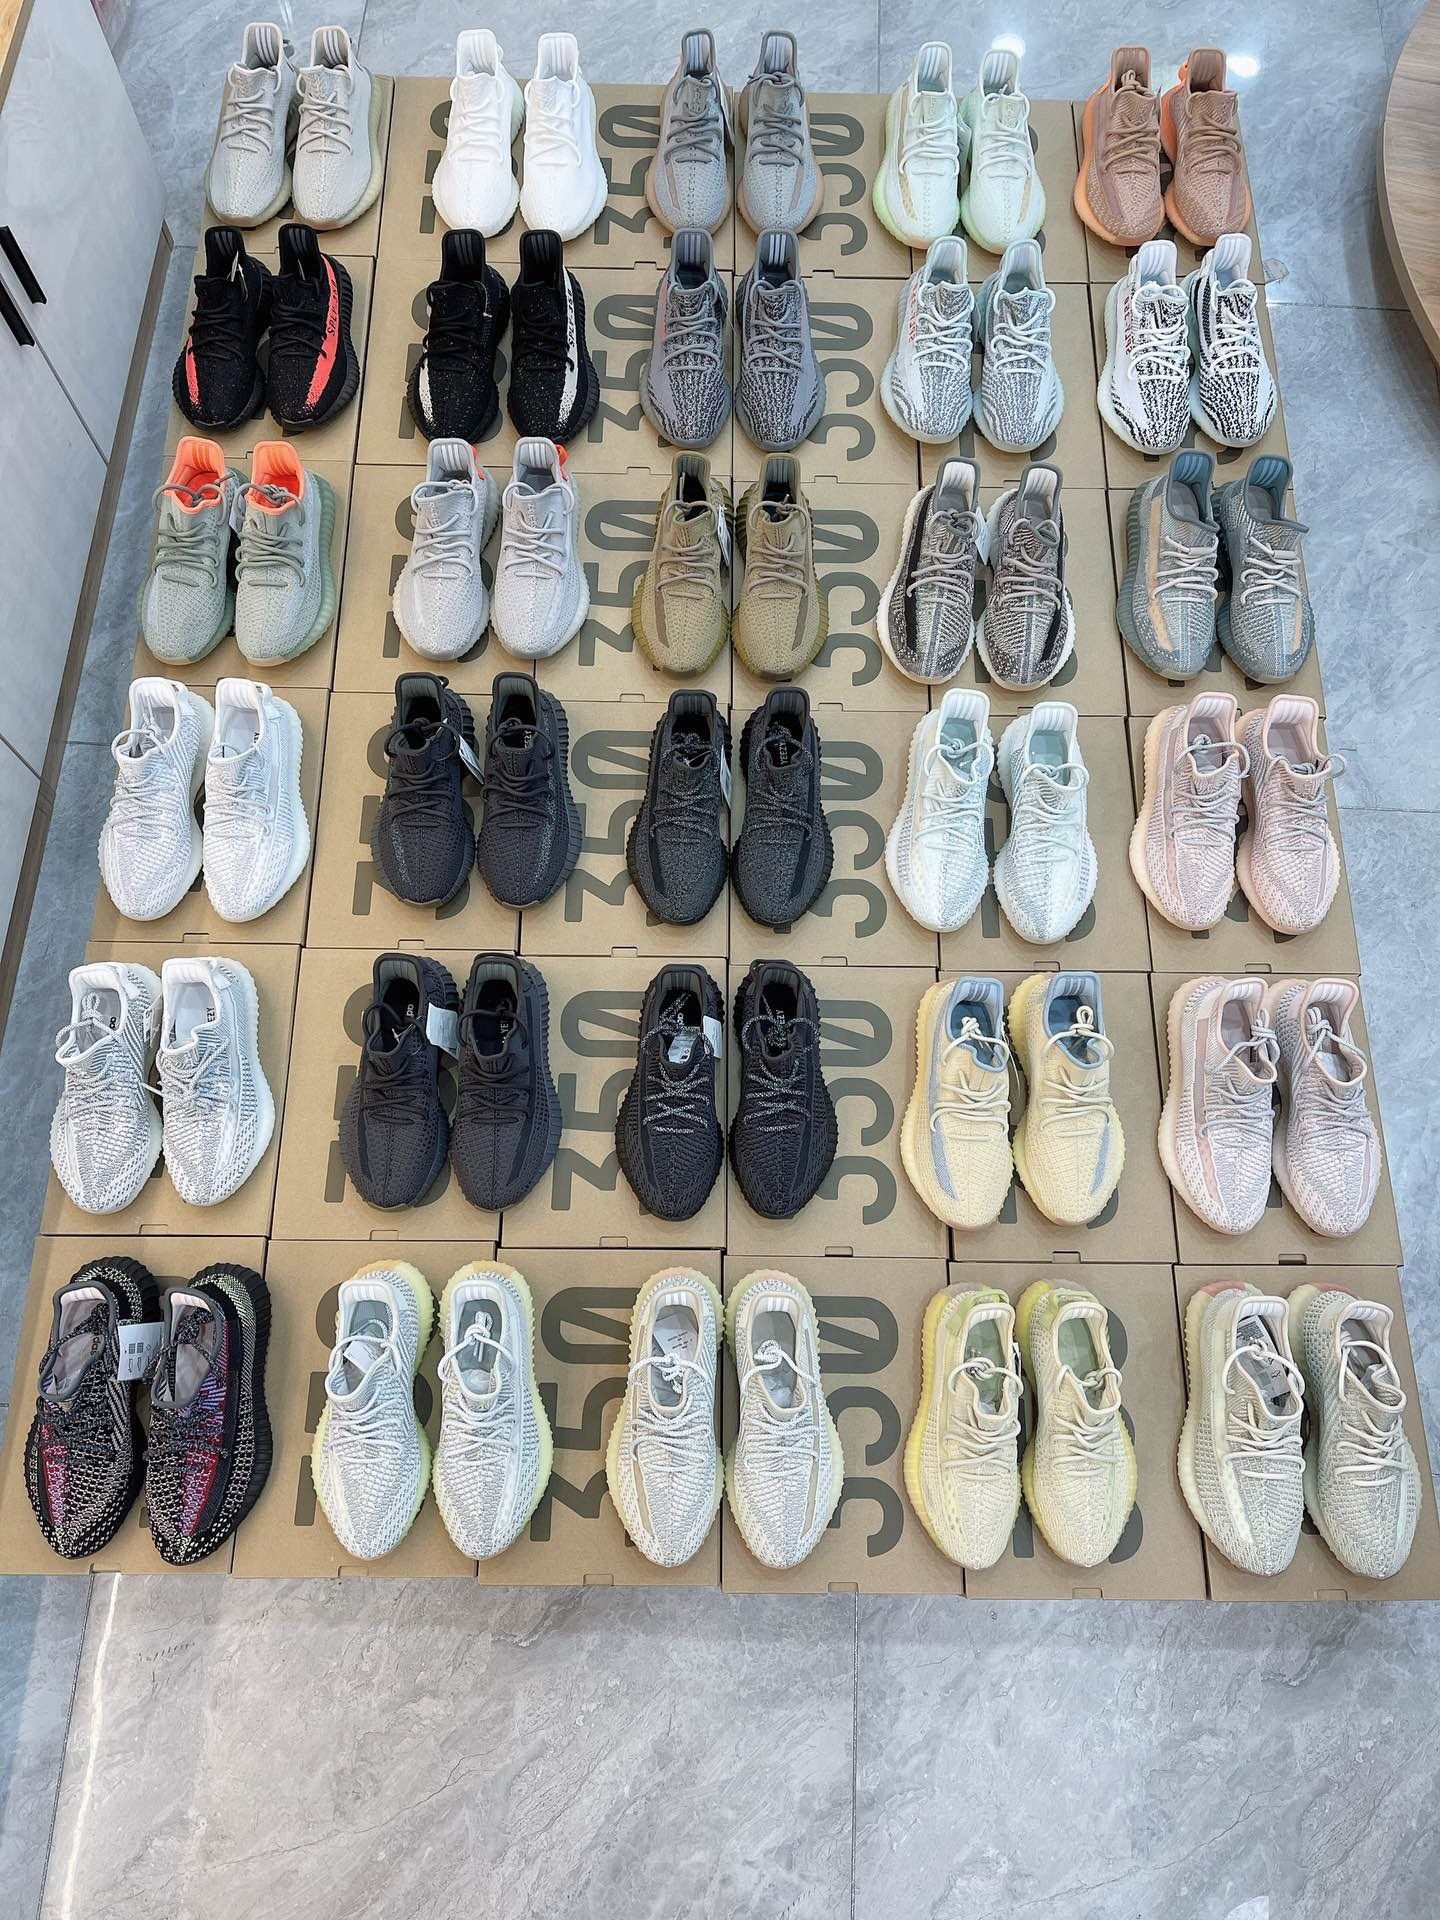 YEEZY SHOES PALLET